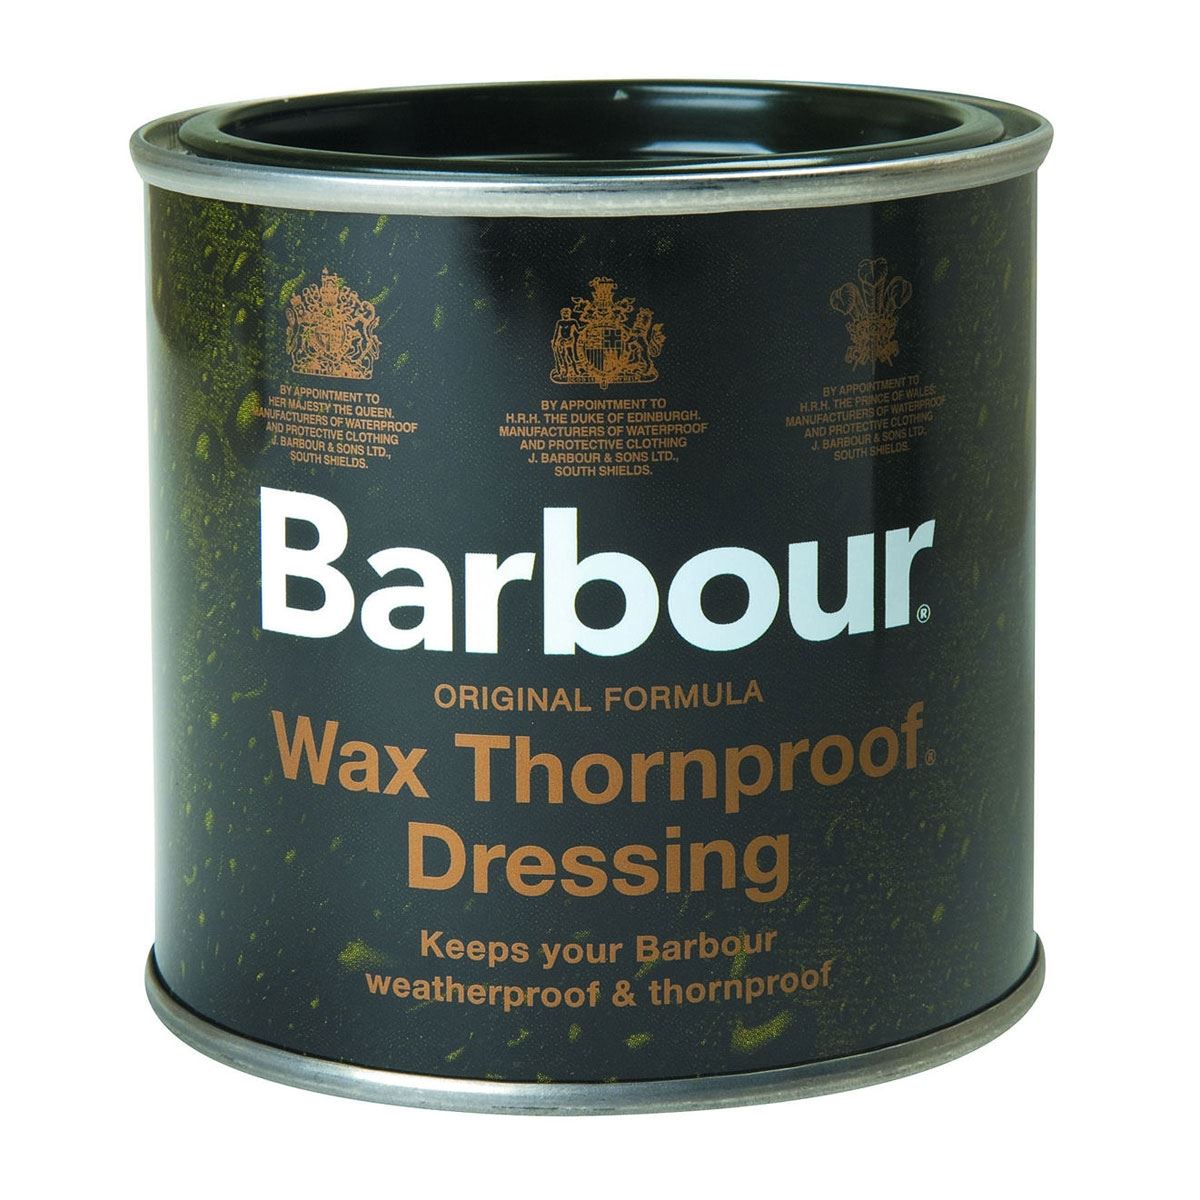 How does the Barbour wax dressing protect the jacket?